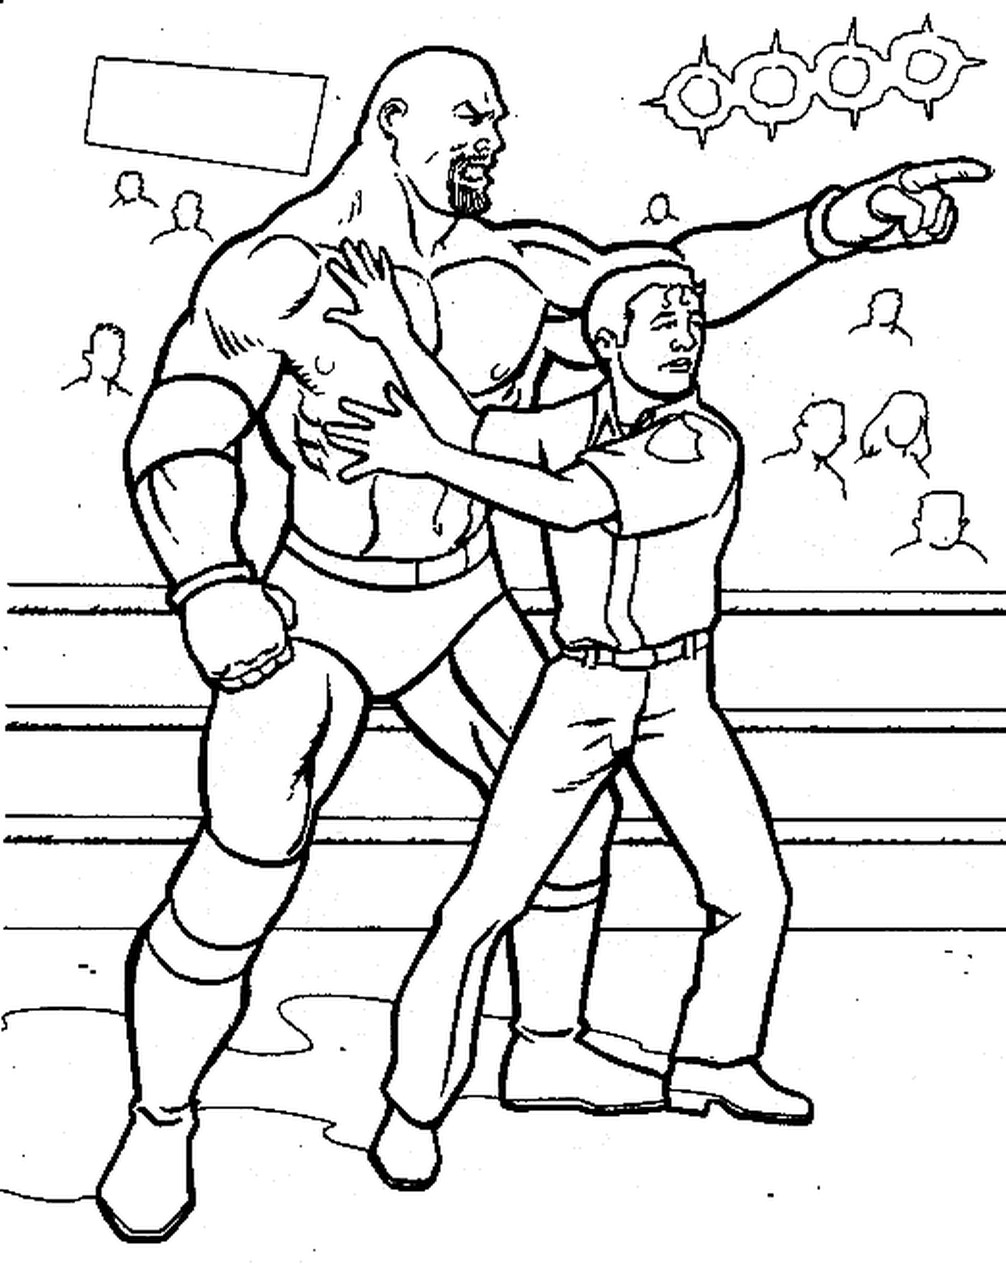 Wwe Belt Coloring Pages at GetColorings.com | Free ...